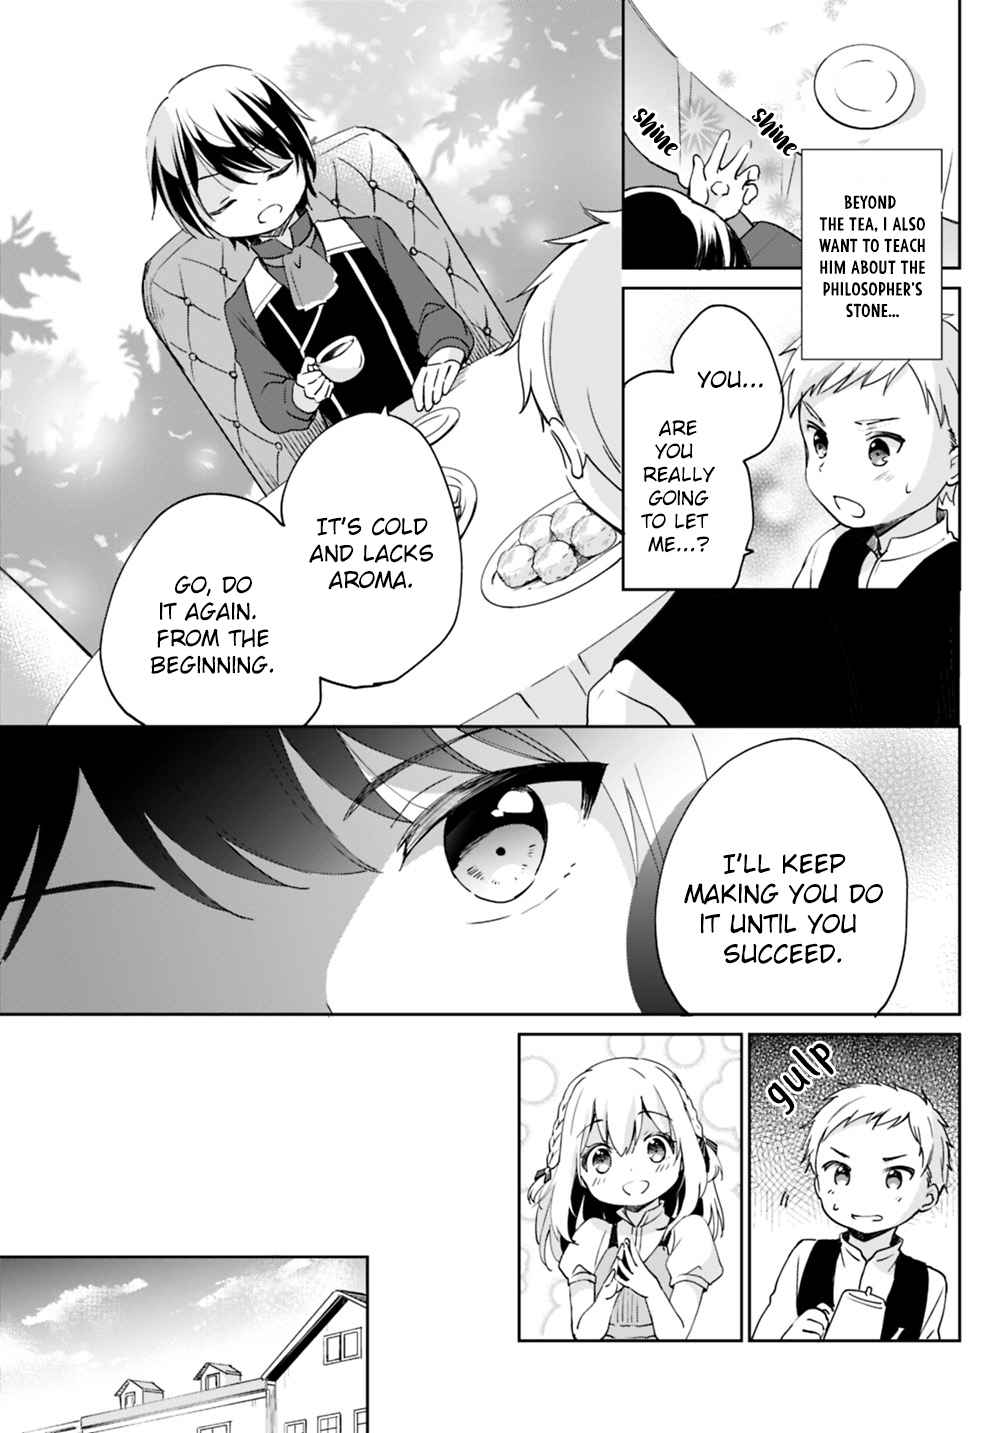 Your SSS rank Afterlife is Confirmed, Virtuous Old Man Vol. 1 Ch. 3